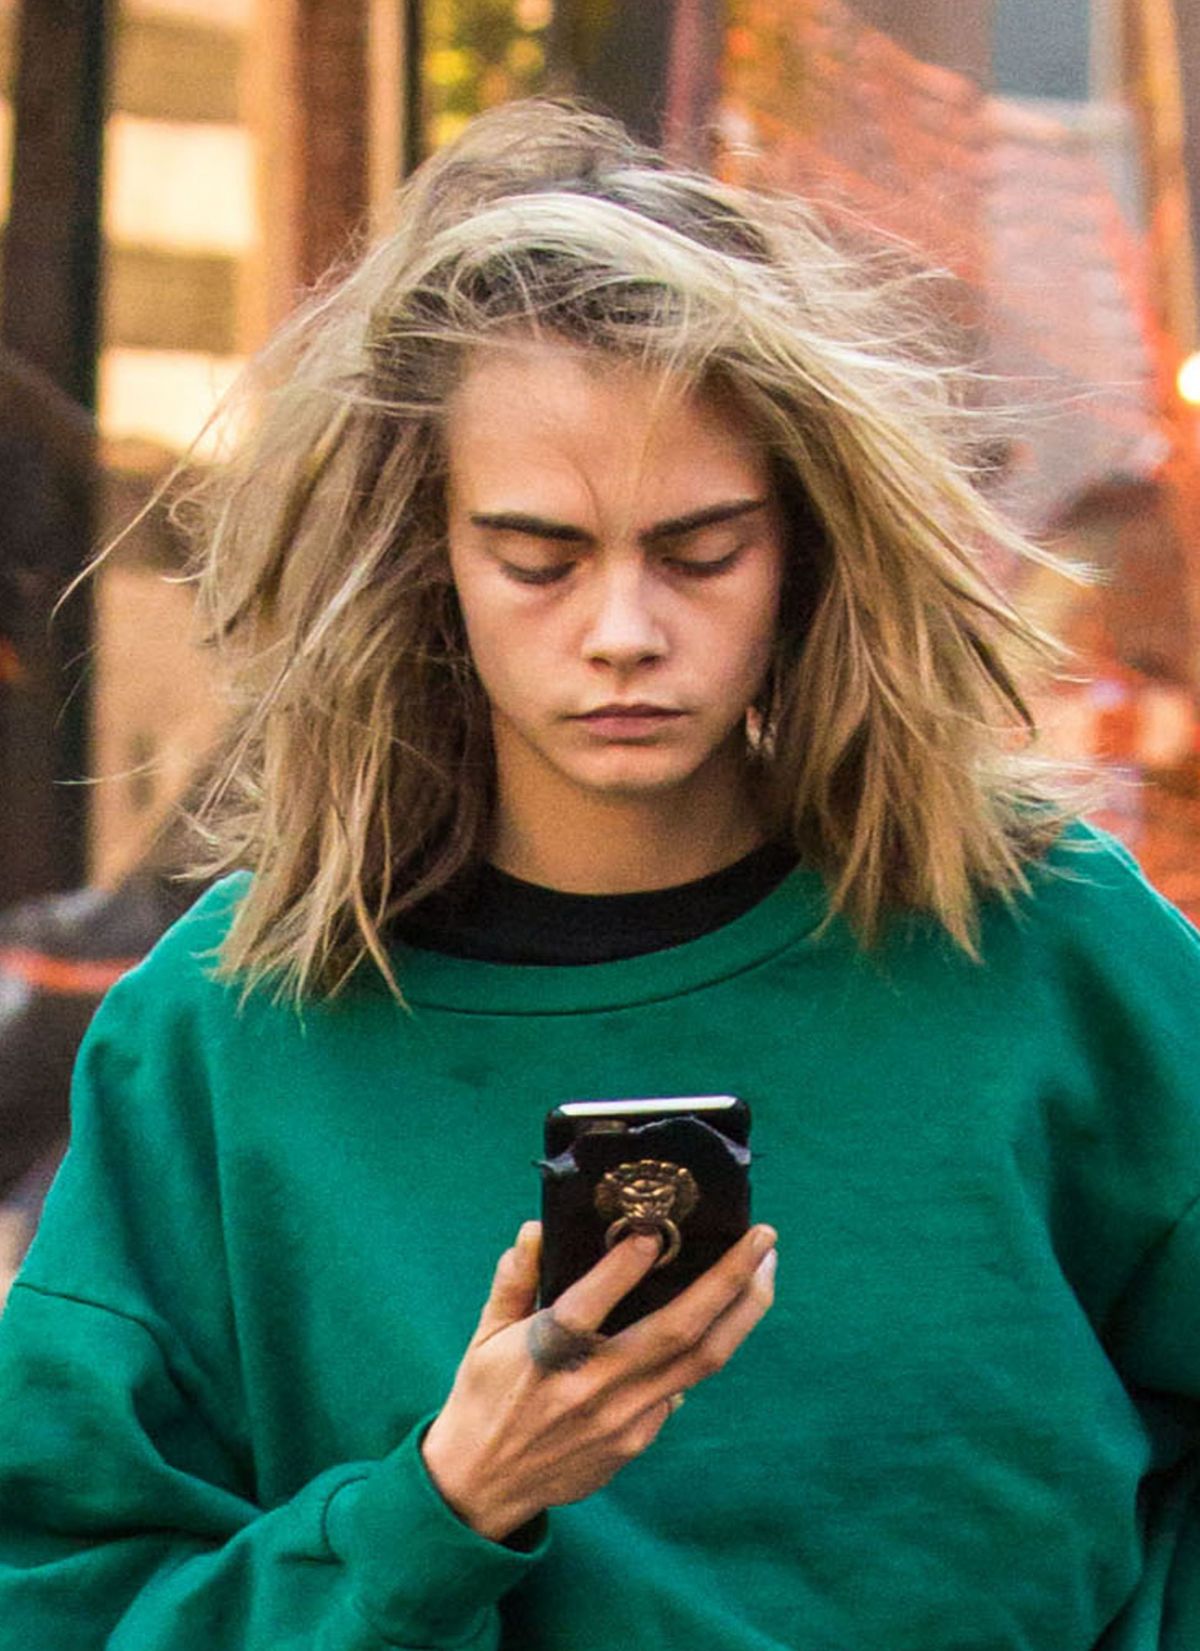 cara-delevingne-out-and-about-in-new-york-10-10-2016_1.jpg